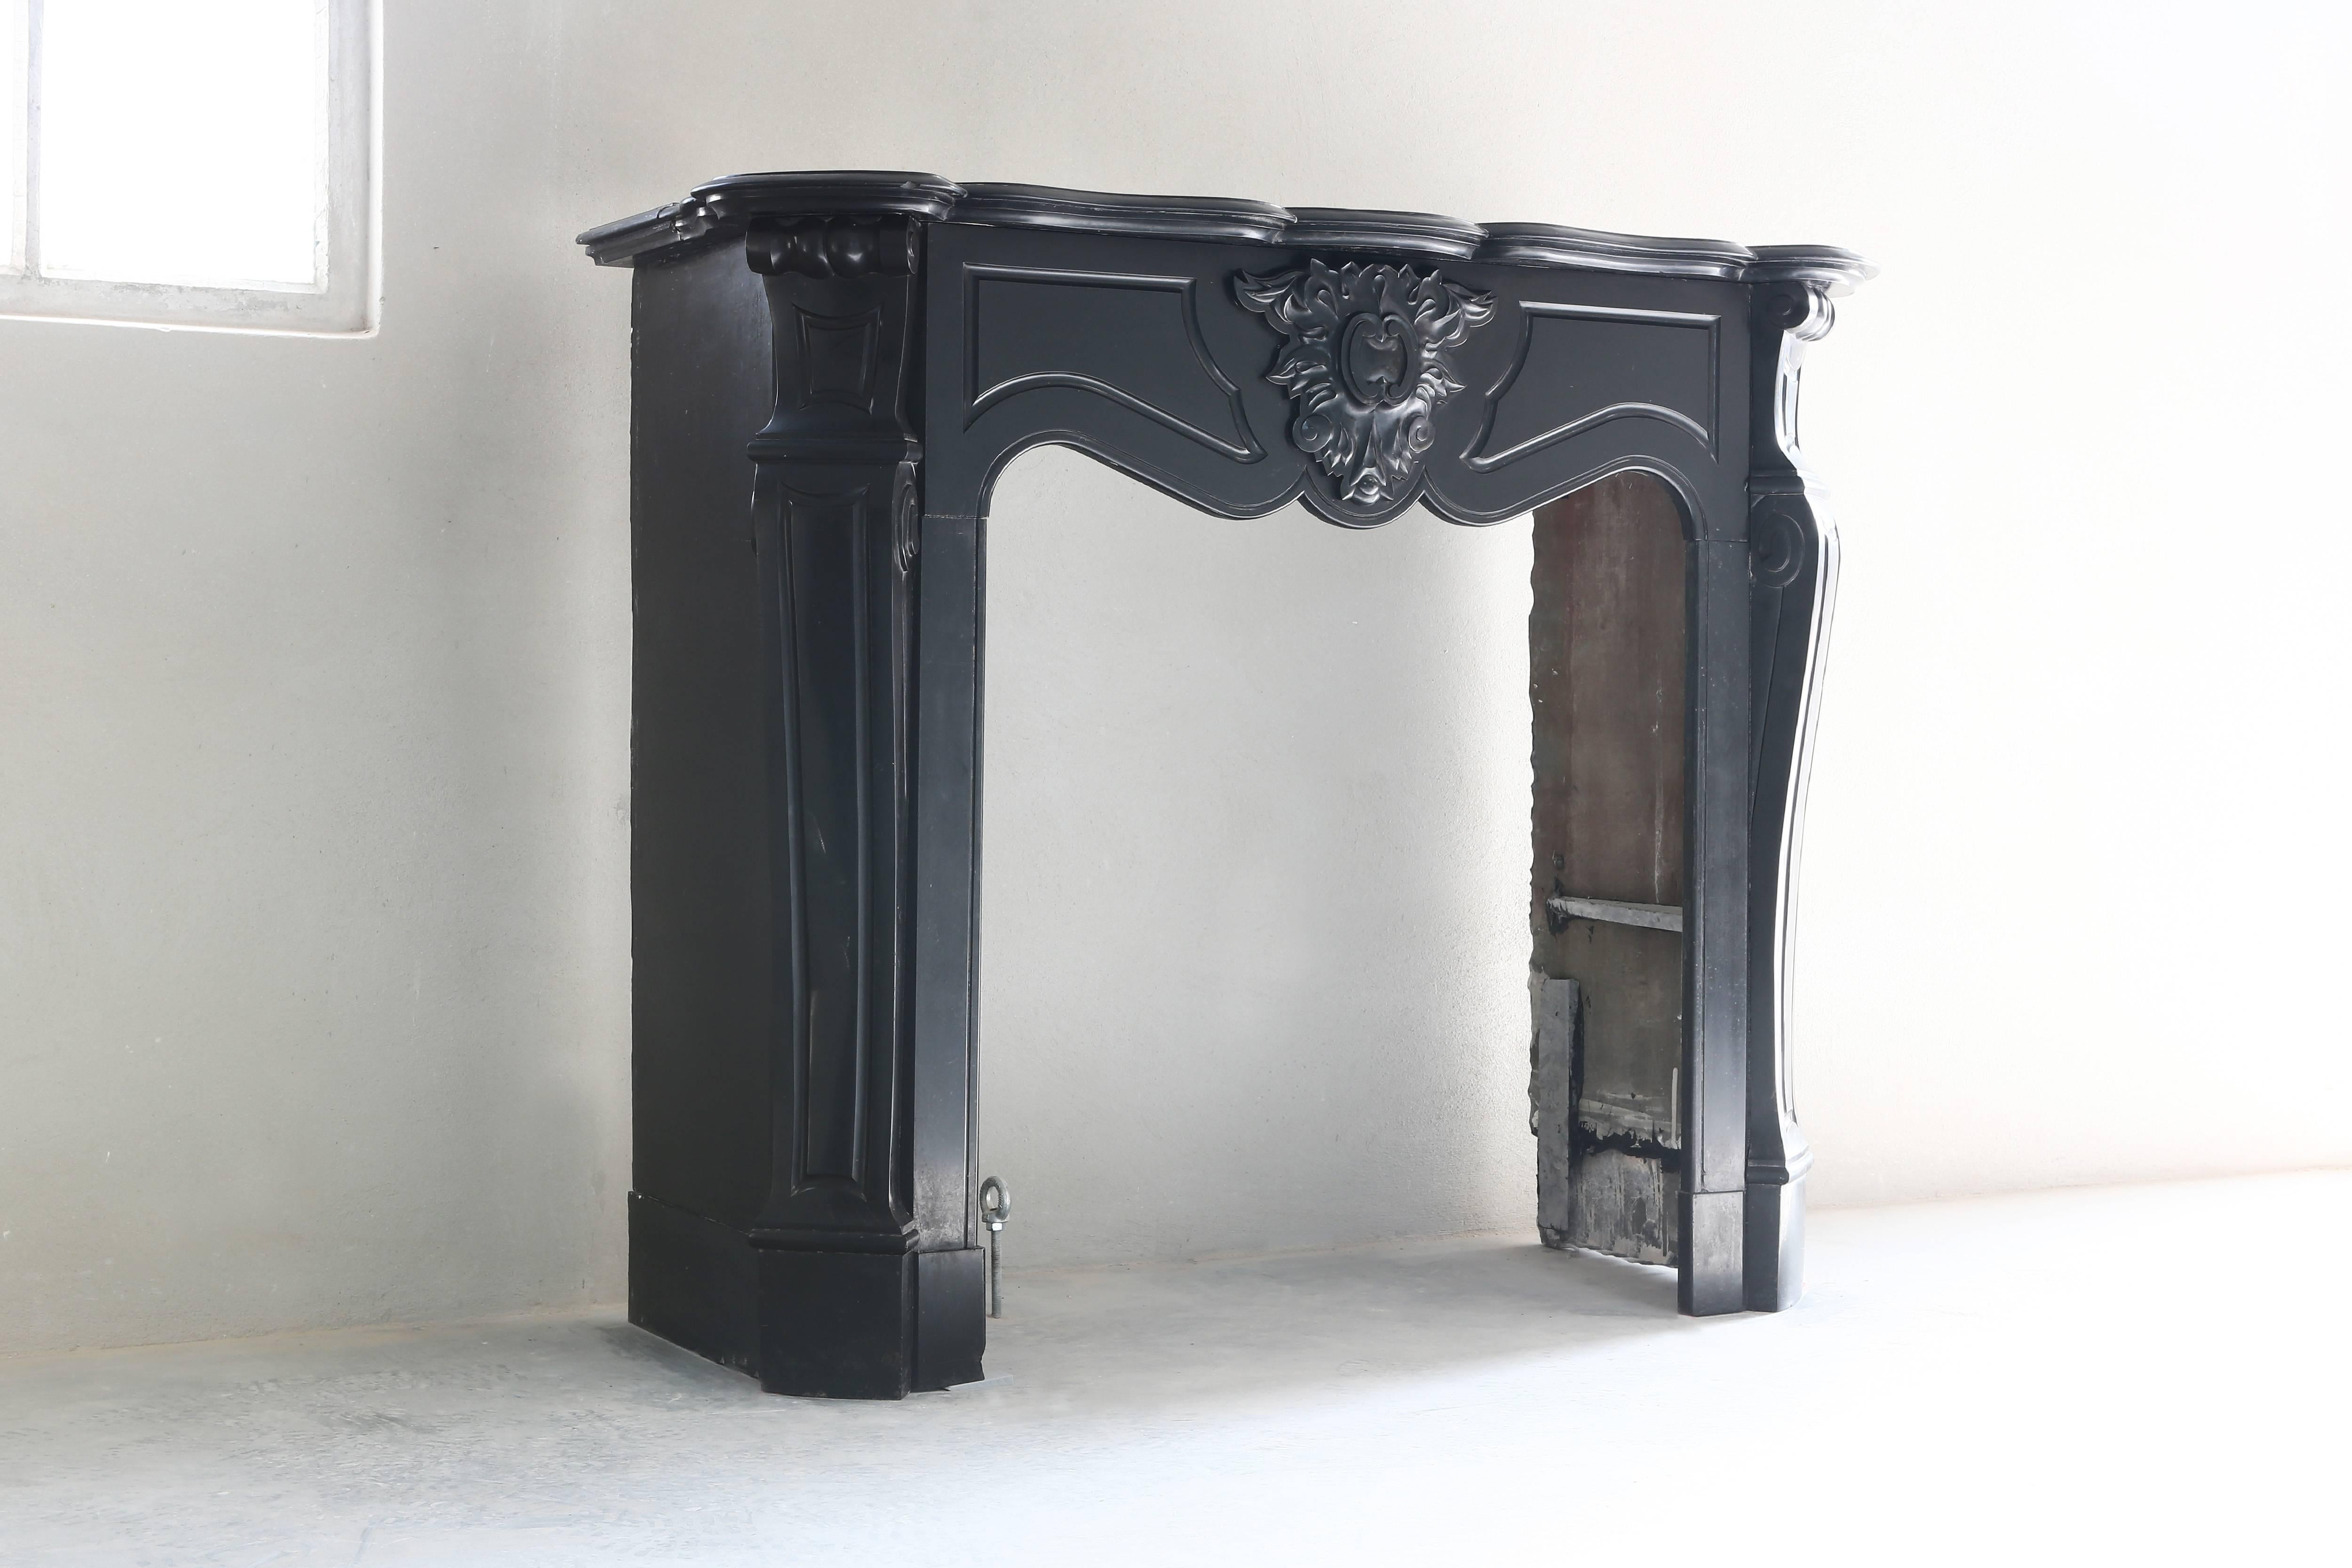 A very nice and antique marble fireplace from Belgium! The kind of marble is called 'Noir de Mazy' and is a very special one that is characterized by the deep black color! This antique fireplace is from the century of Louis XV.